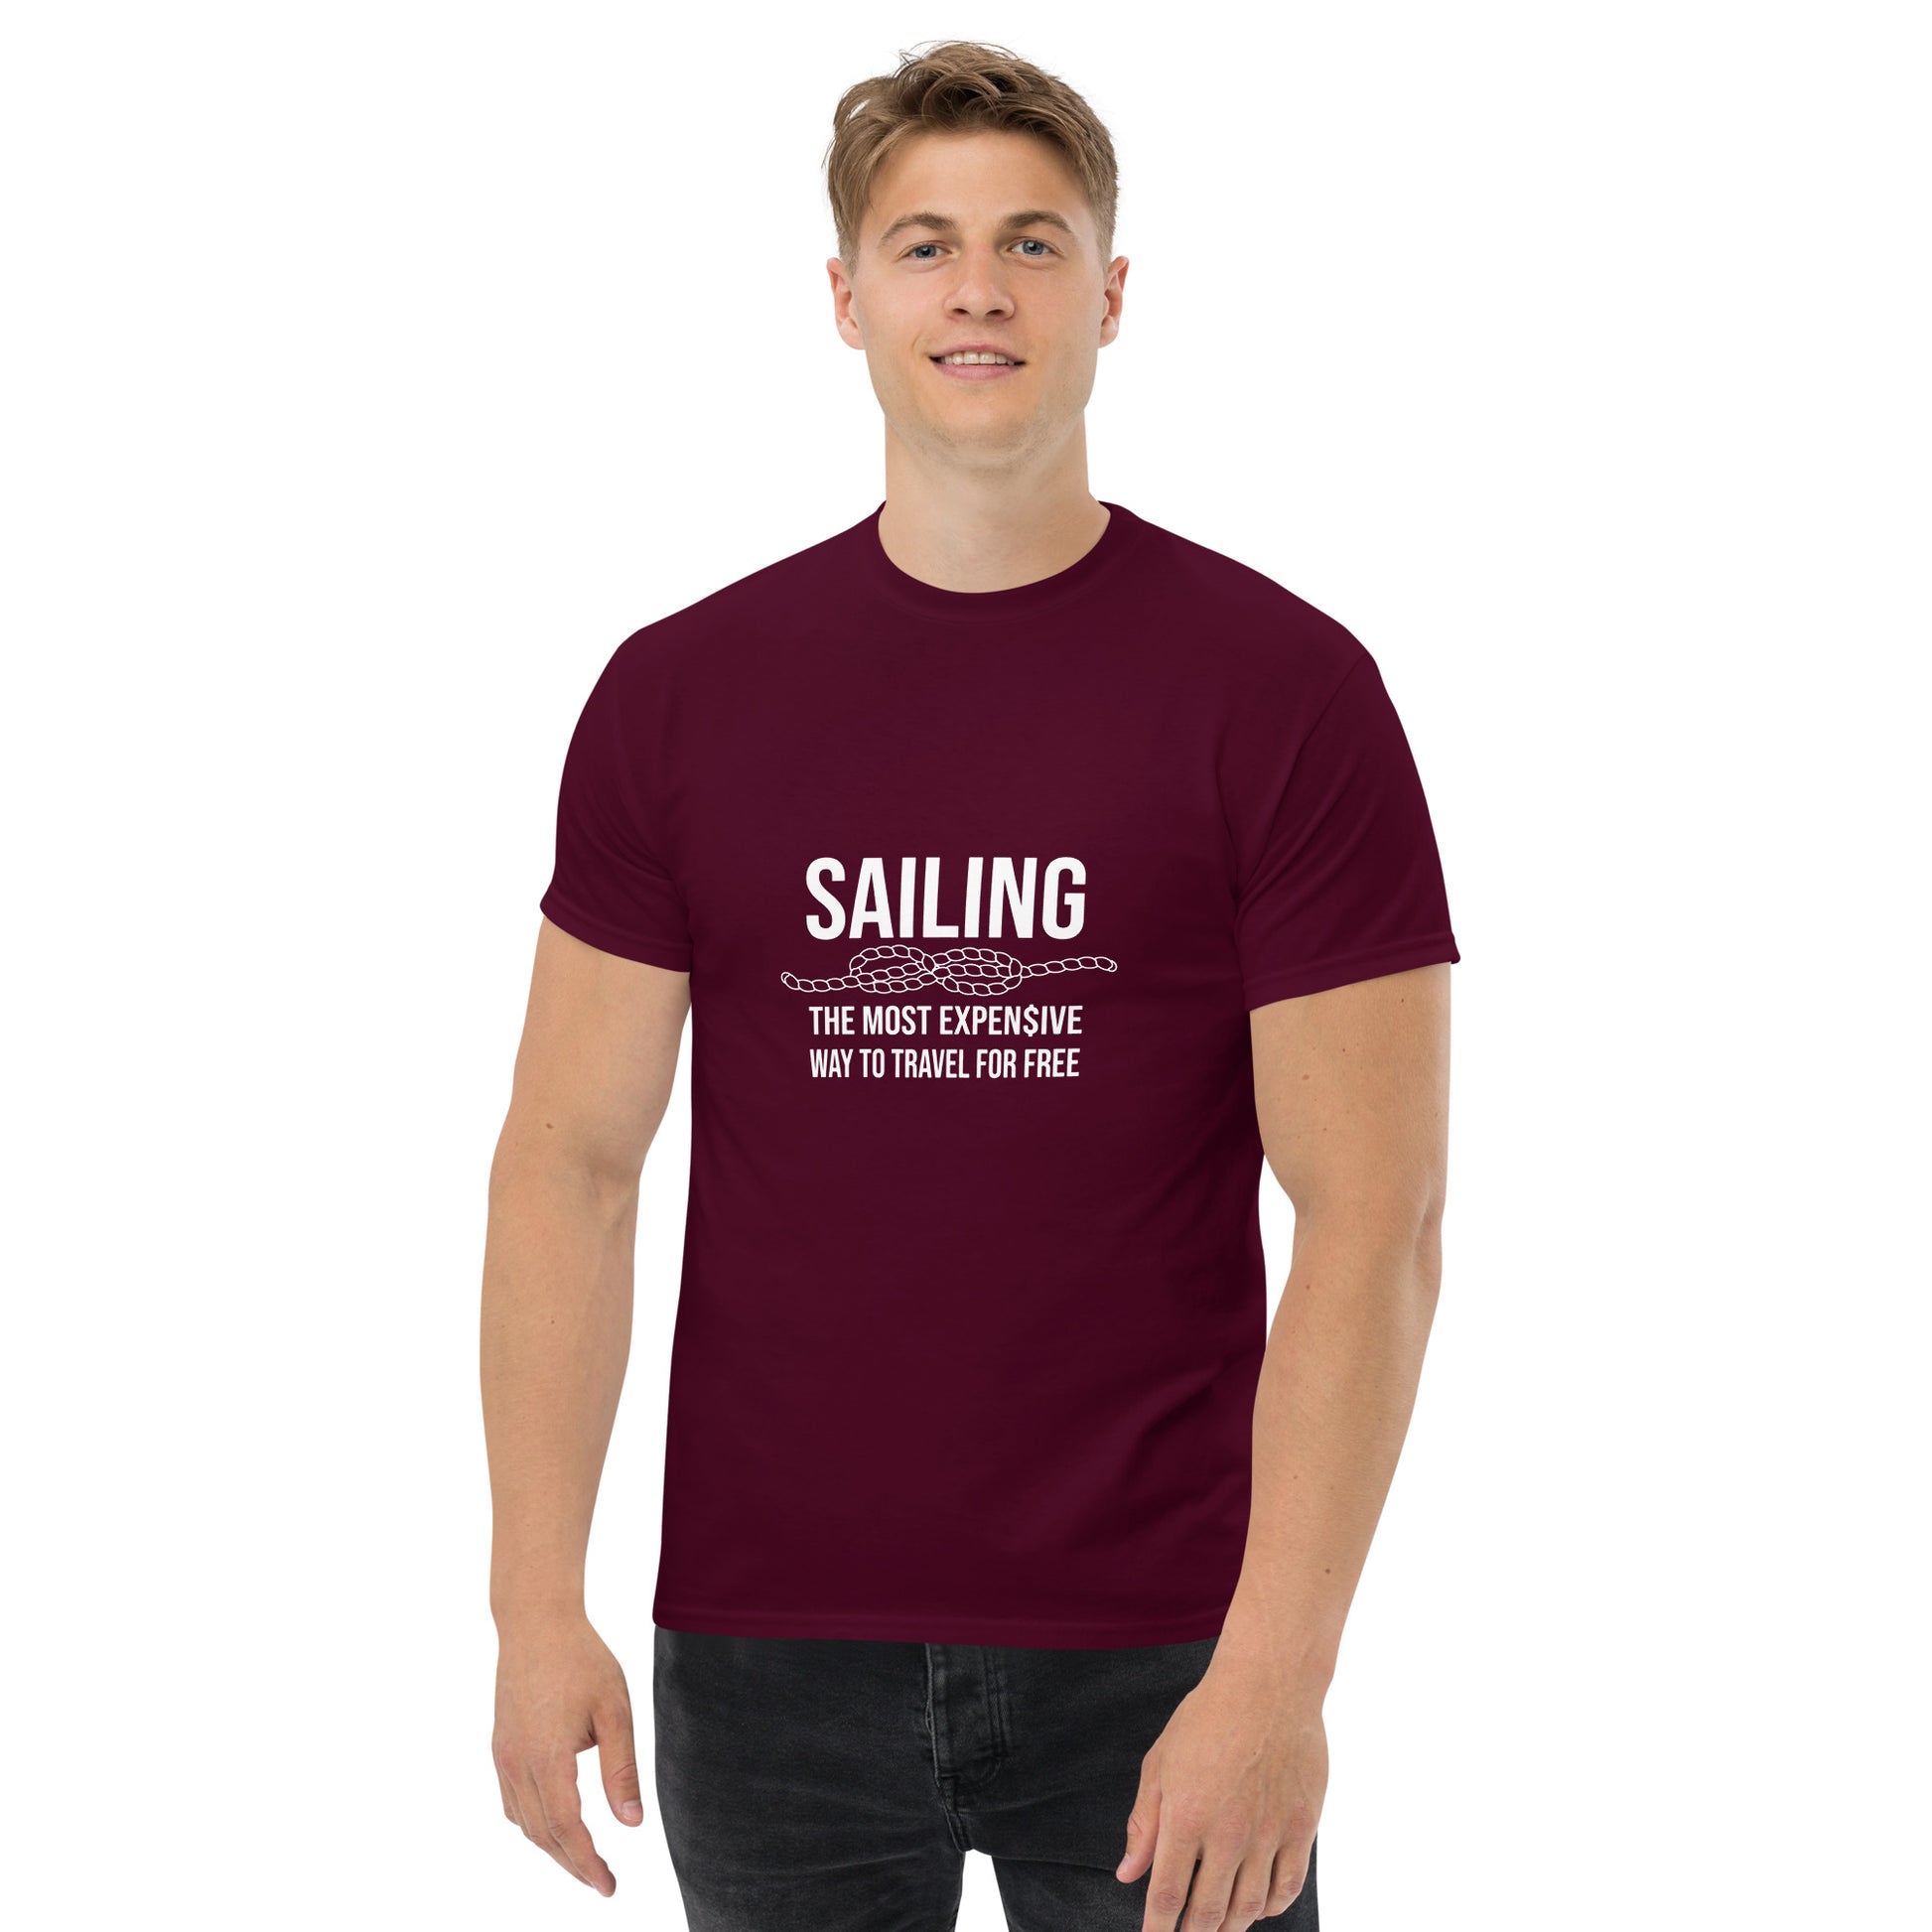 Sailing: The most expensive way to travel for free – Sassy Sailor